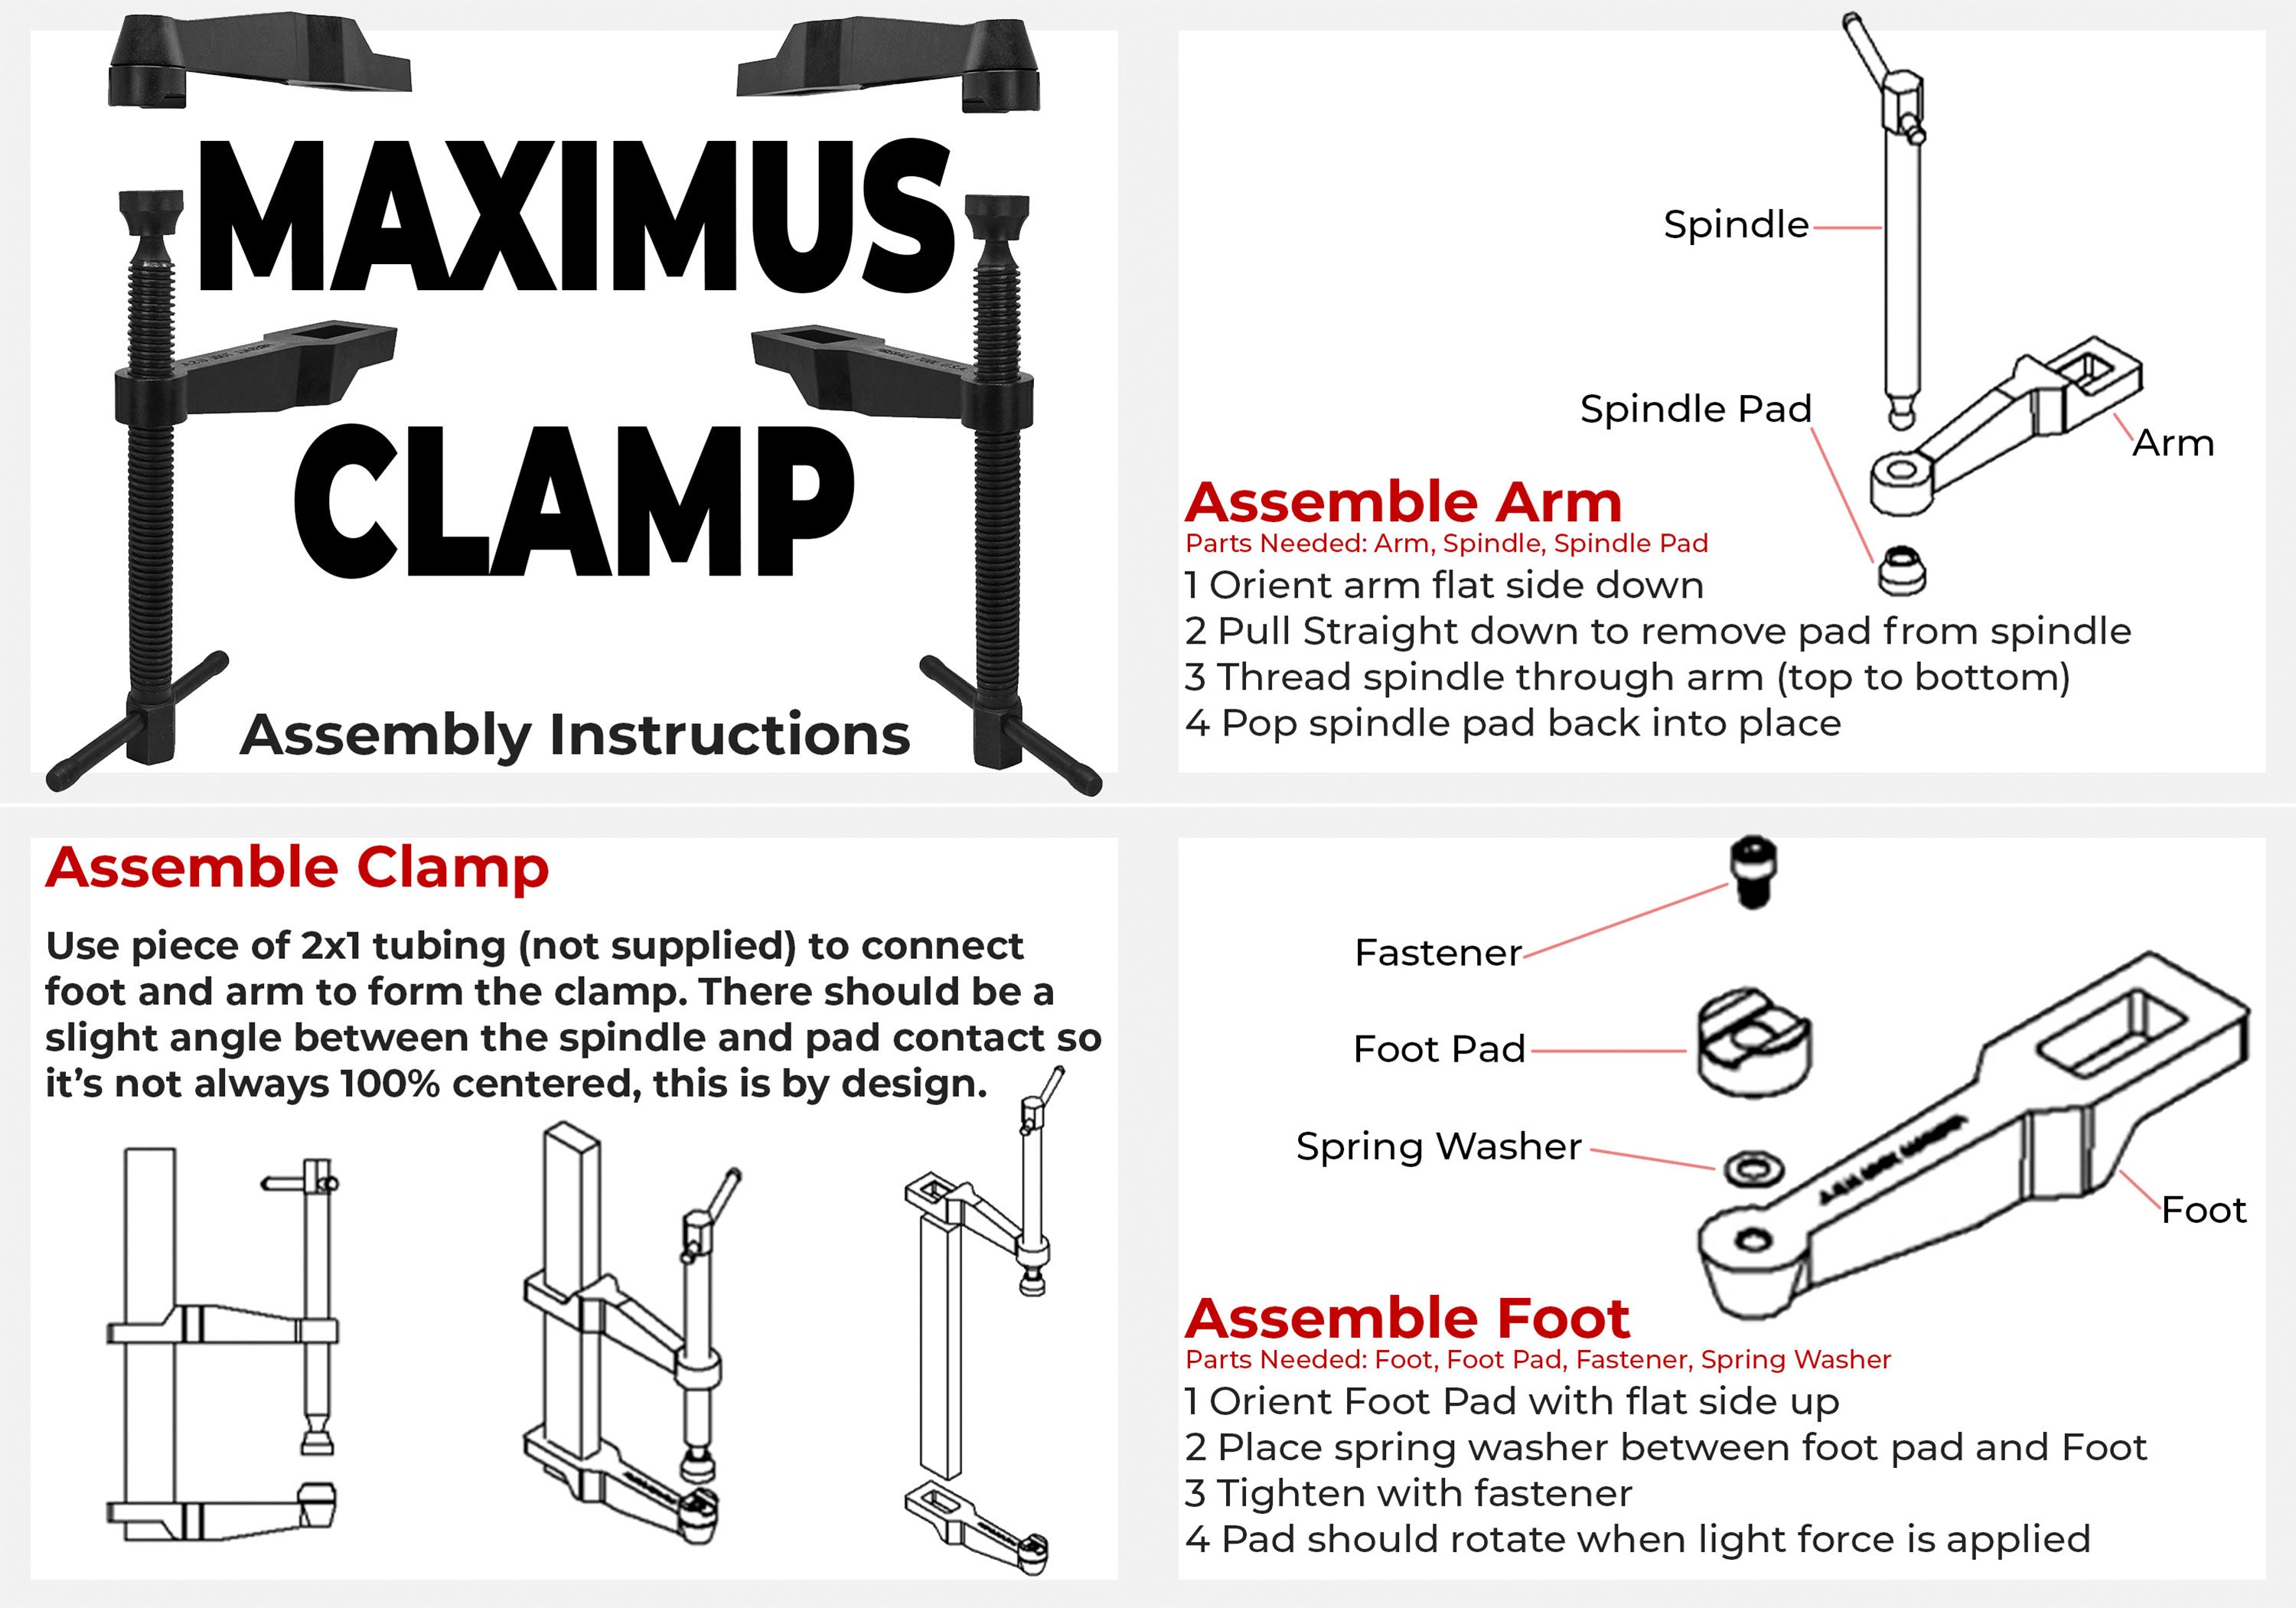 Maximus Bar and Dog Clamp (2 Sets of Clamps)